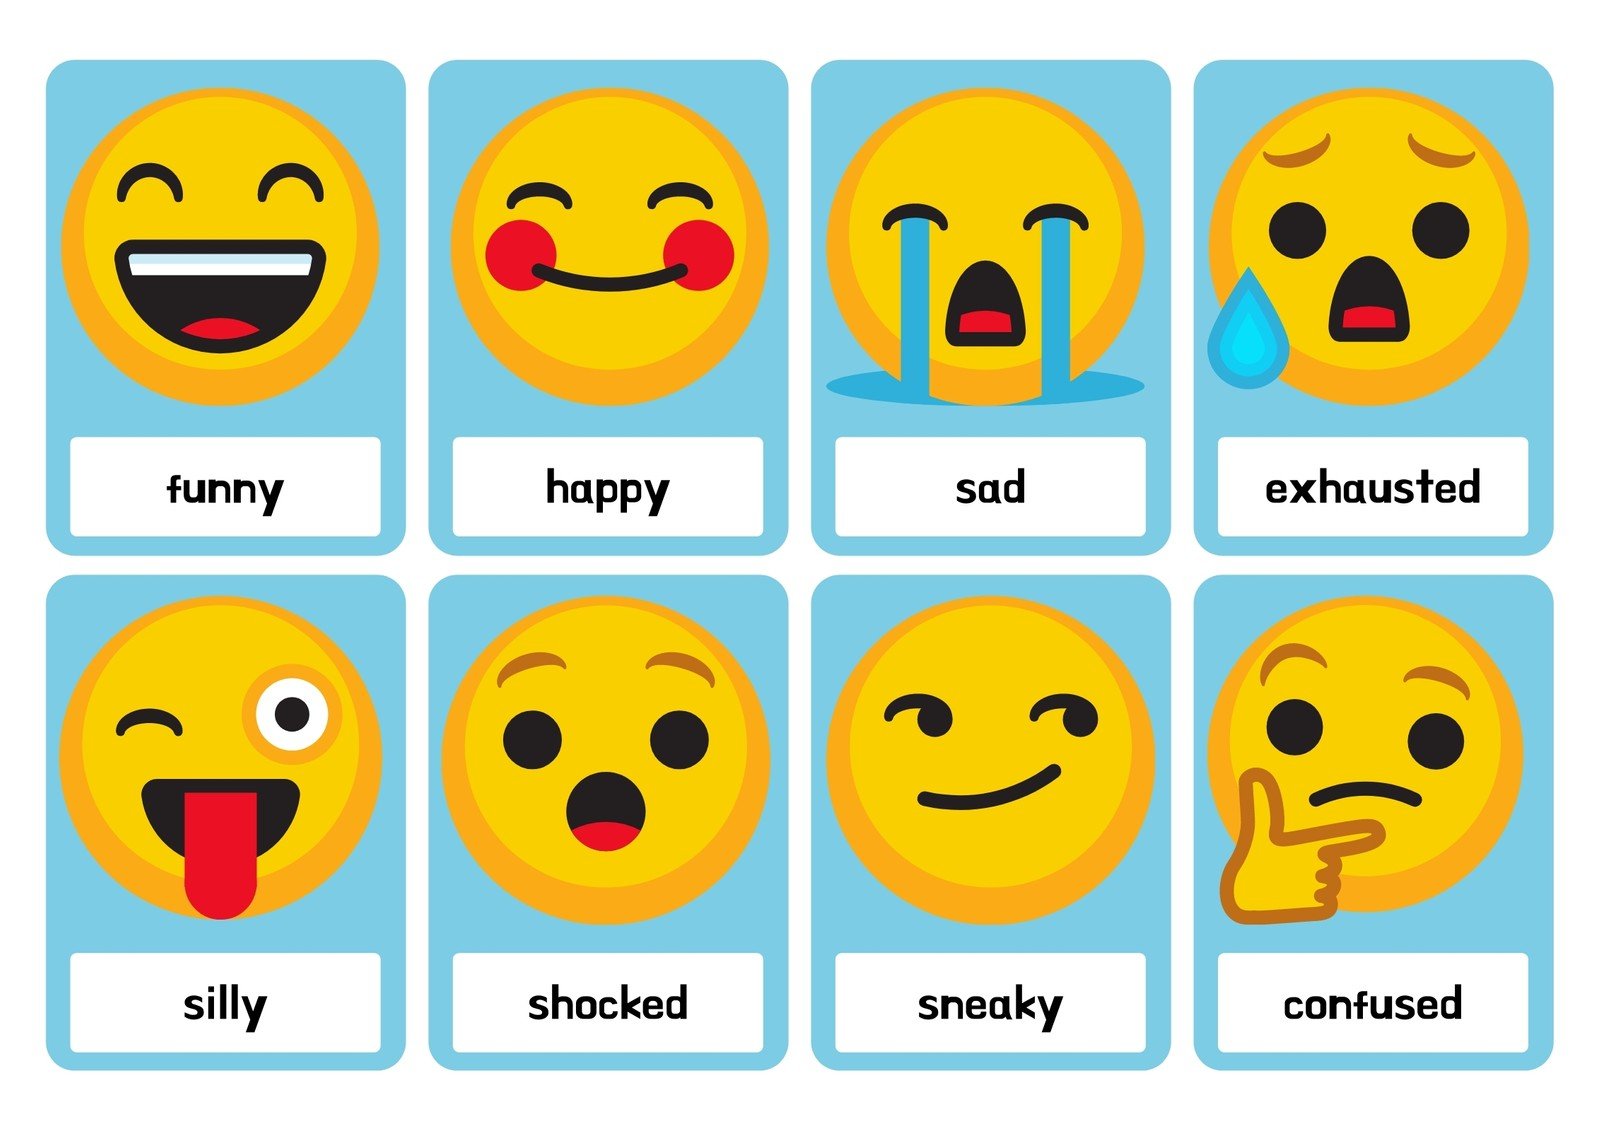 printable-list-of-emotions-and-feelings-clipart-31490-the-best-porn